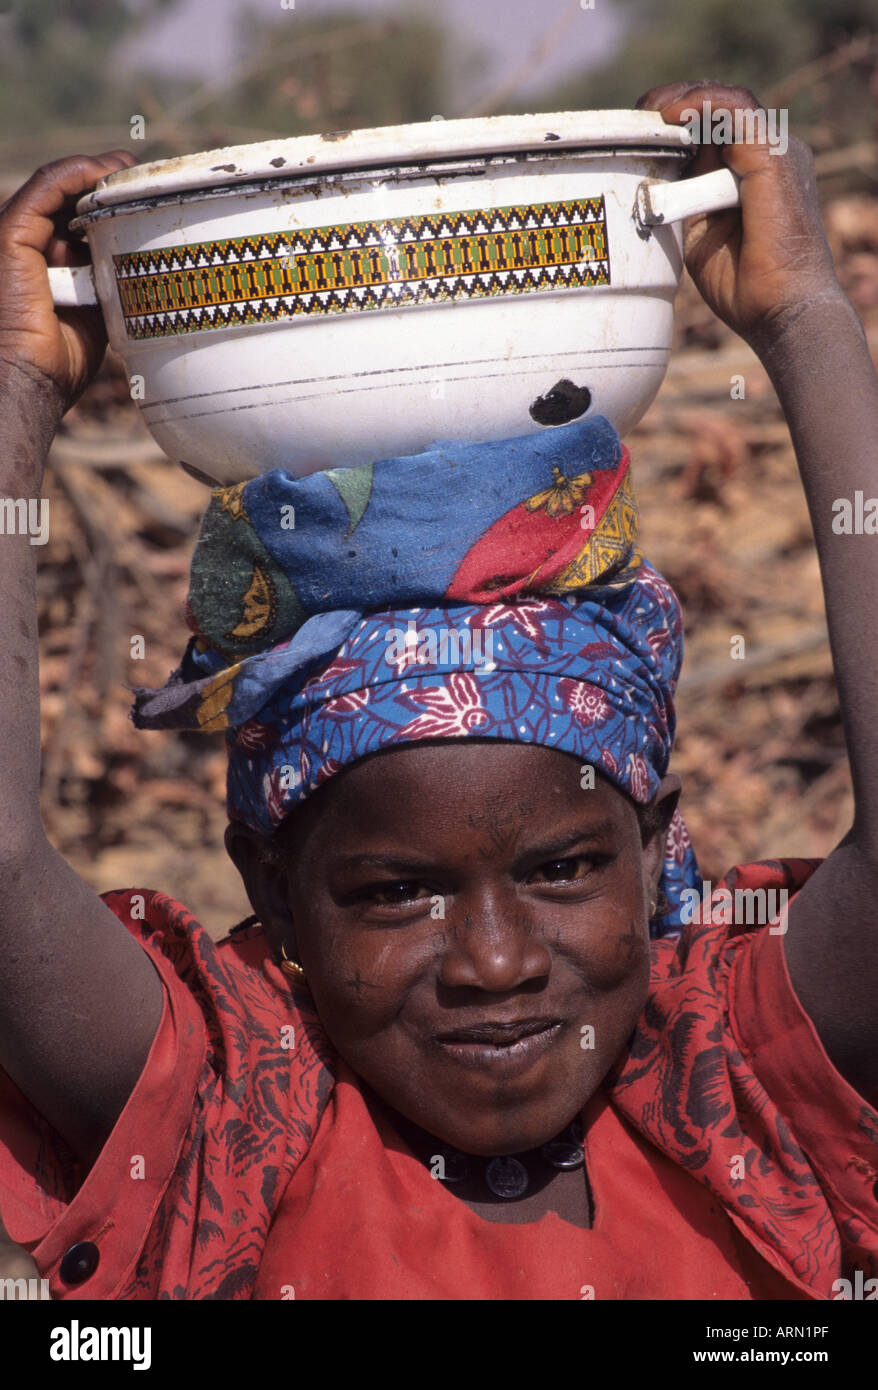 Kankamtuti, Niger, Africa. Fulani Girl with Facial Scarification Carrying Bowl of Food on Head. Stock Photo